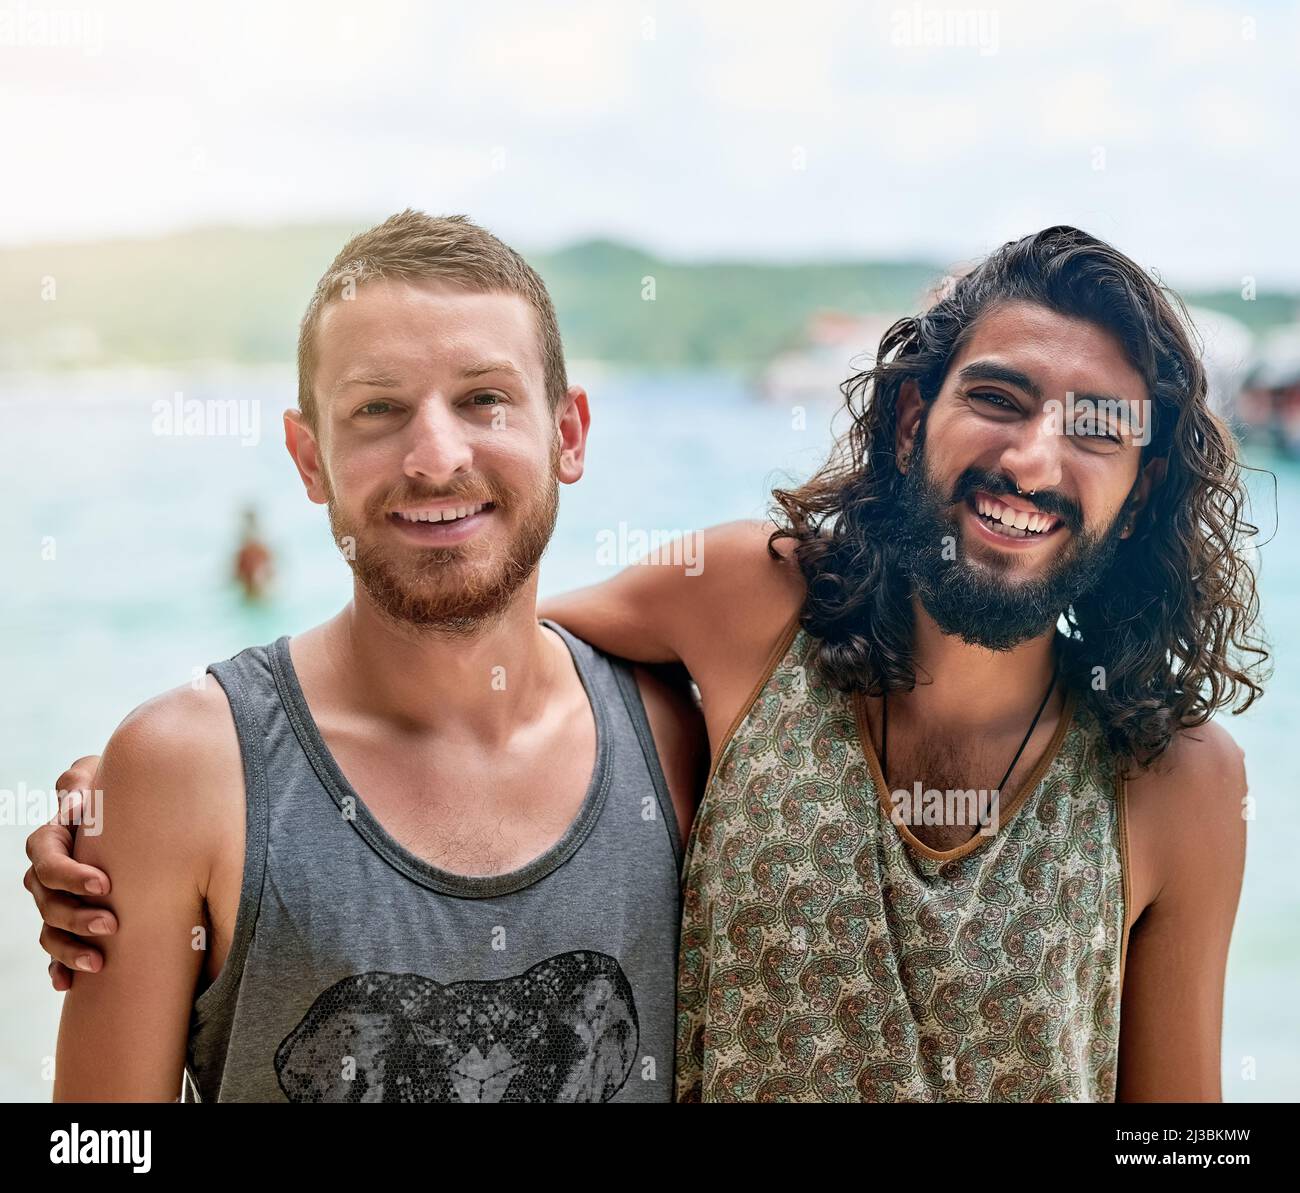 Bros day at the beach. Portrait of two male friends enjoying a day at the beach while on vacation. Stock Photo